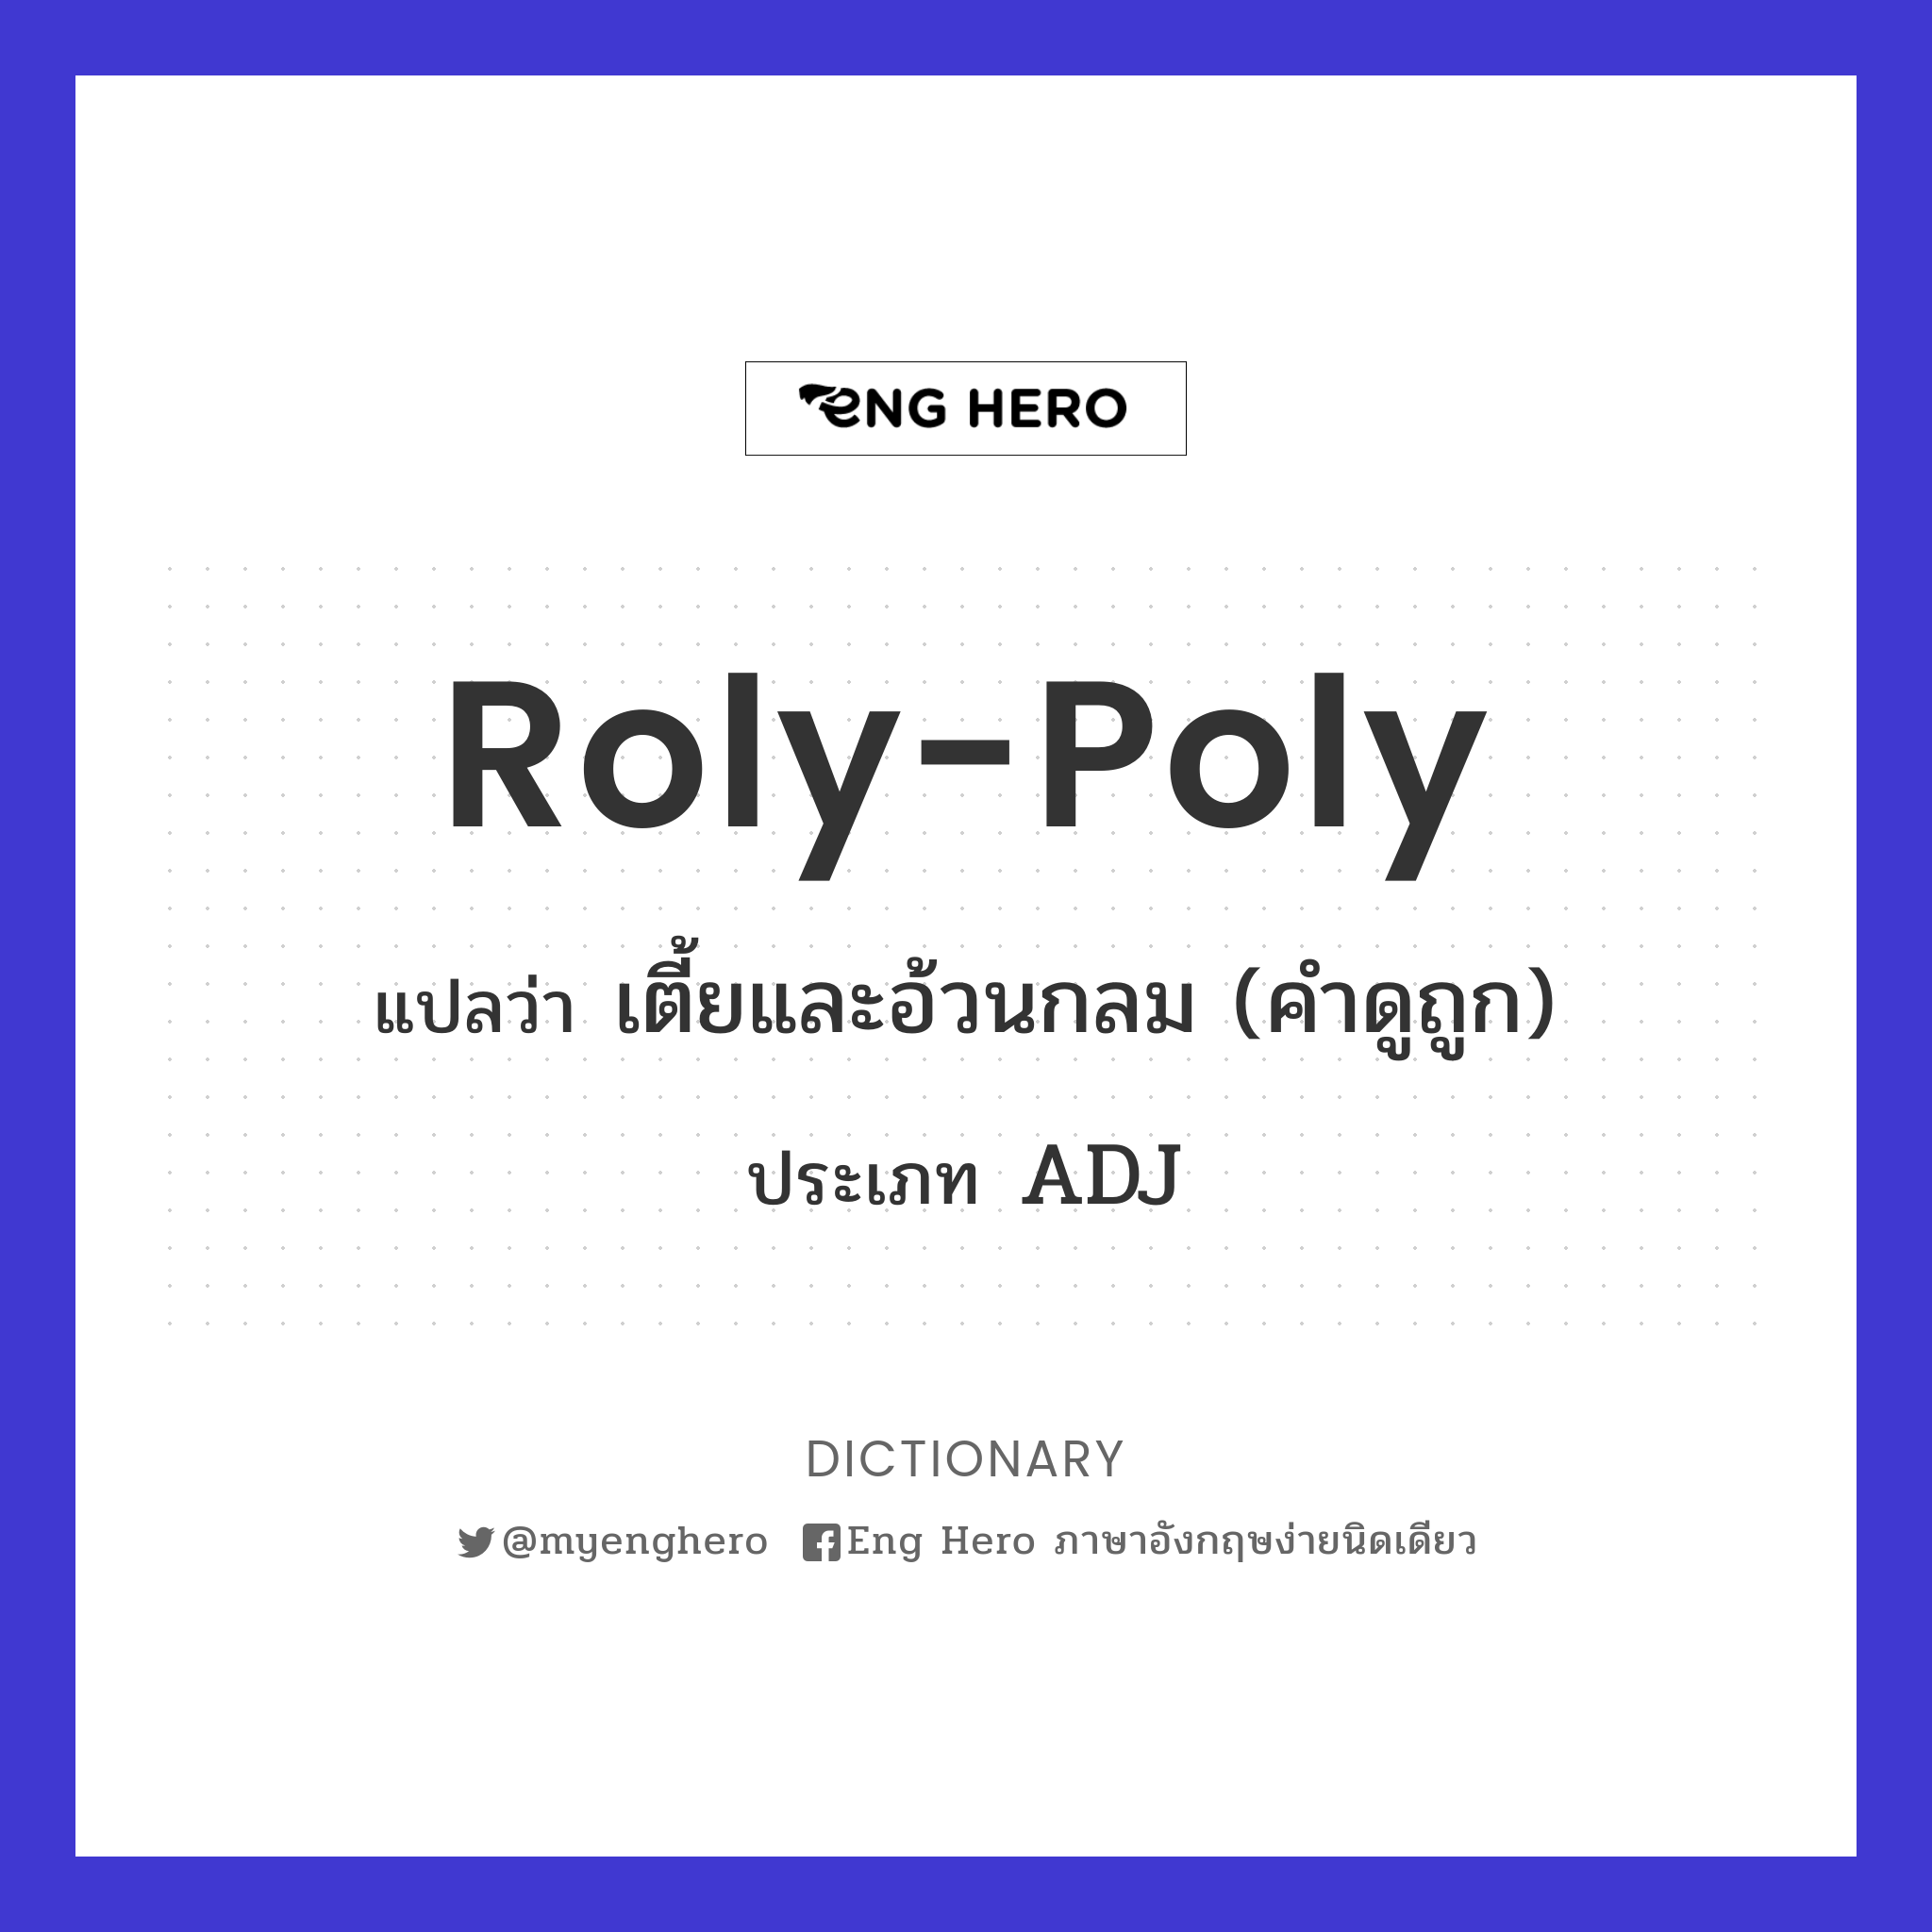 roly-poly